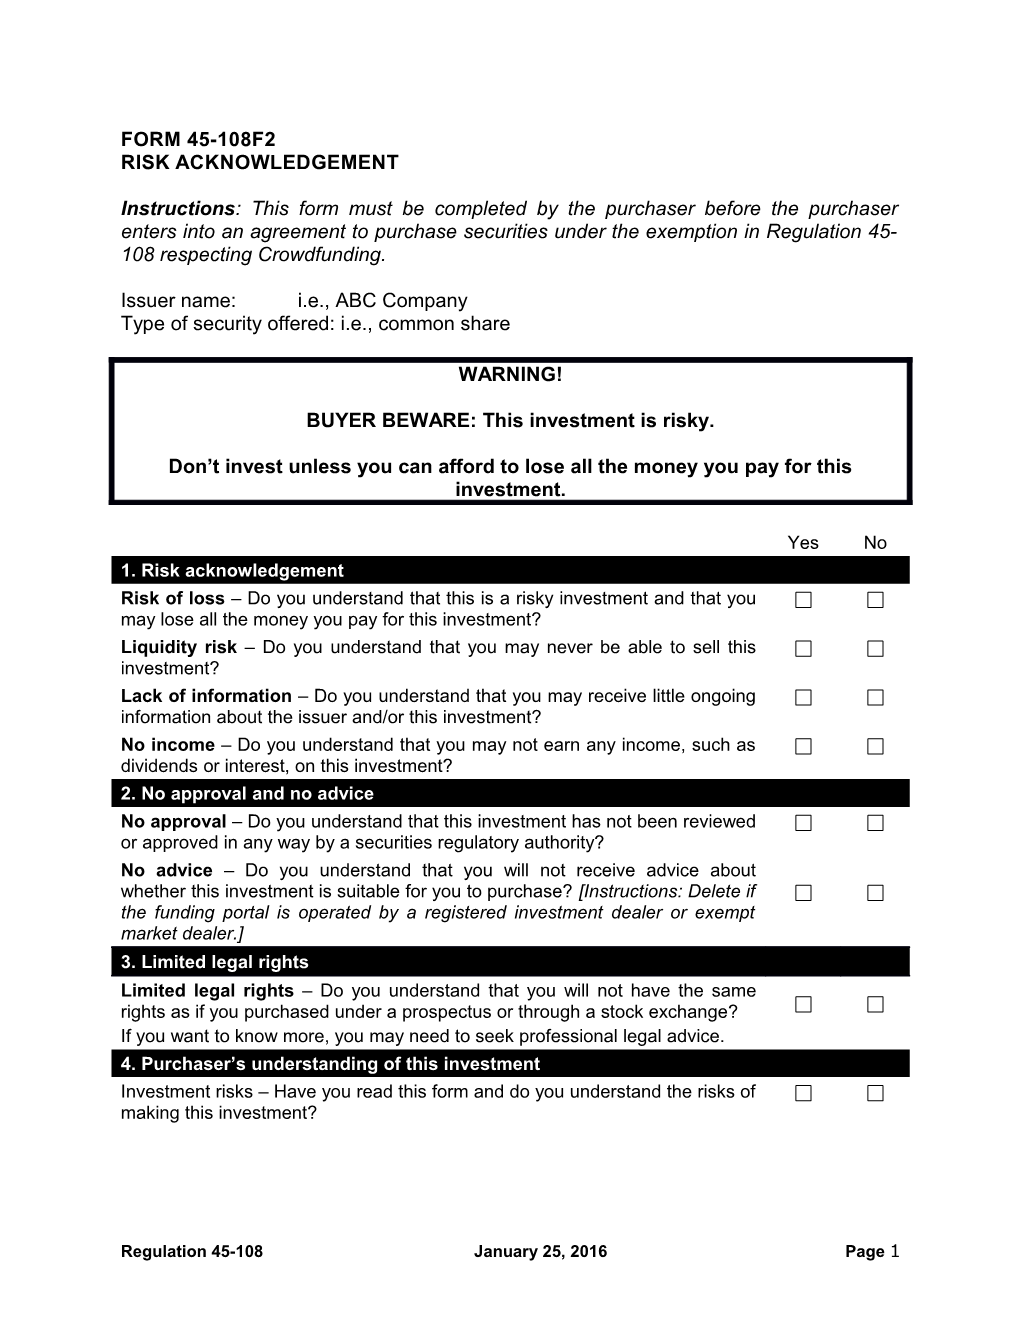 FORM 45-108F2 Risk Acknowledgement